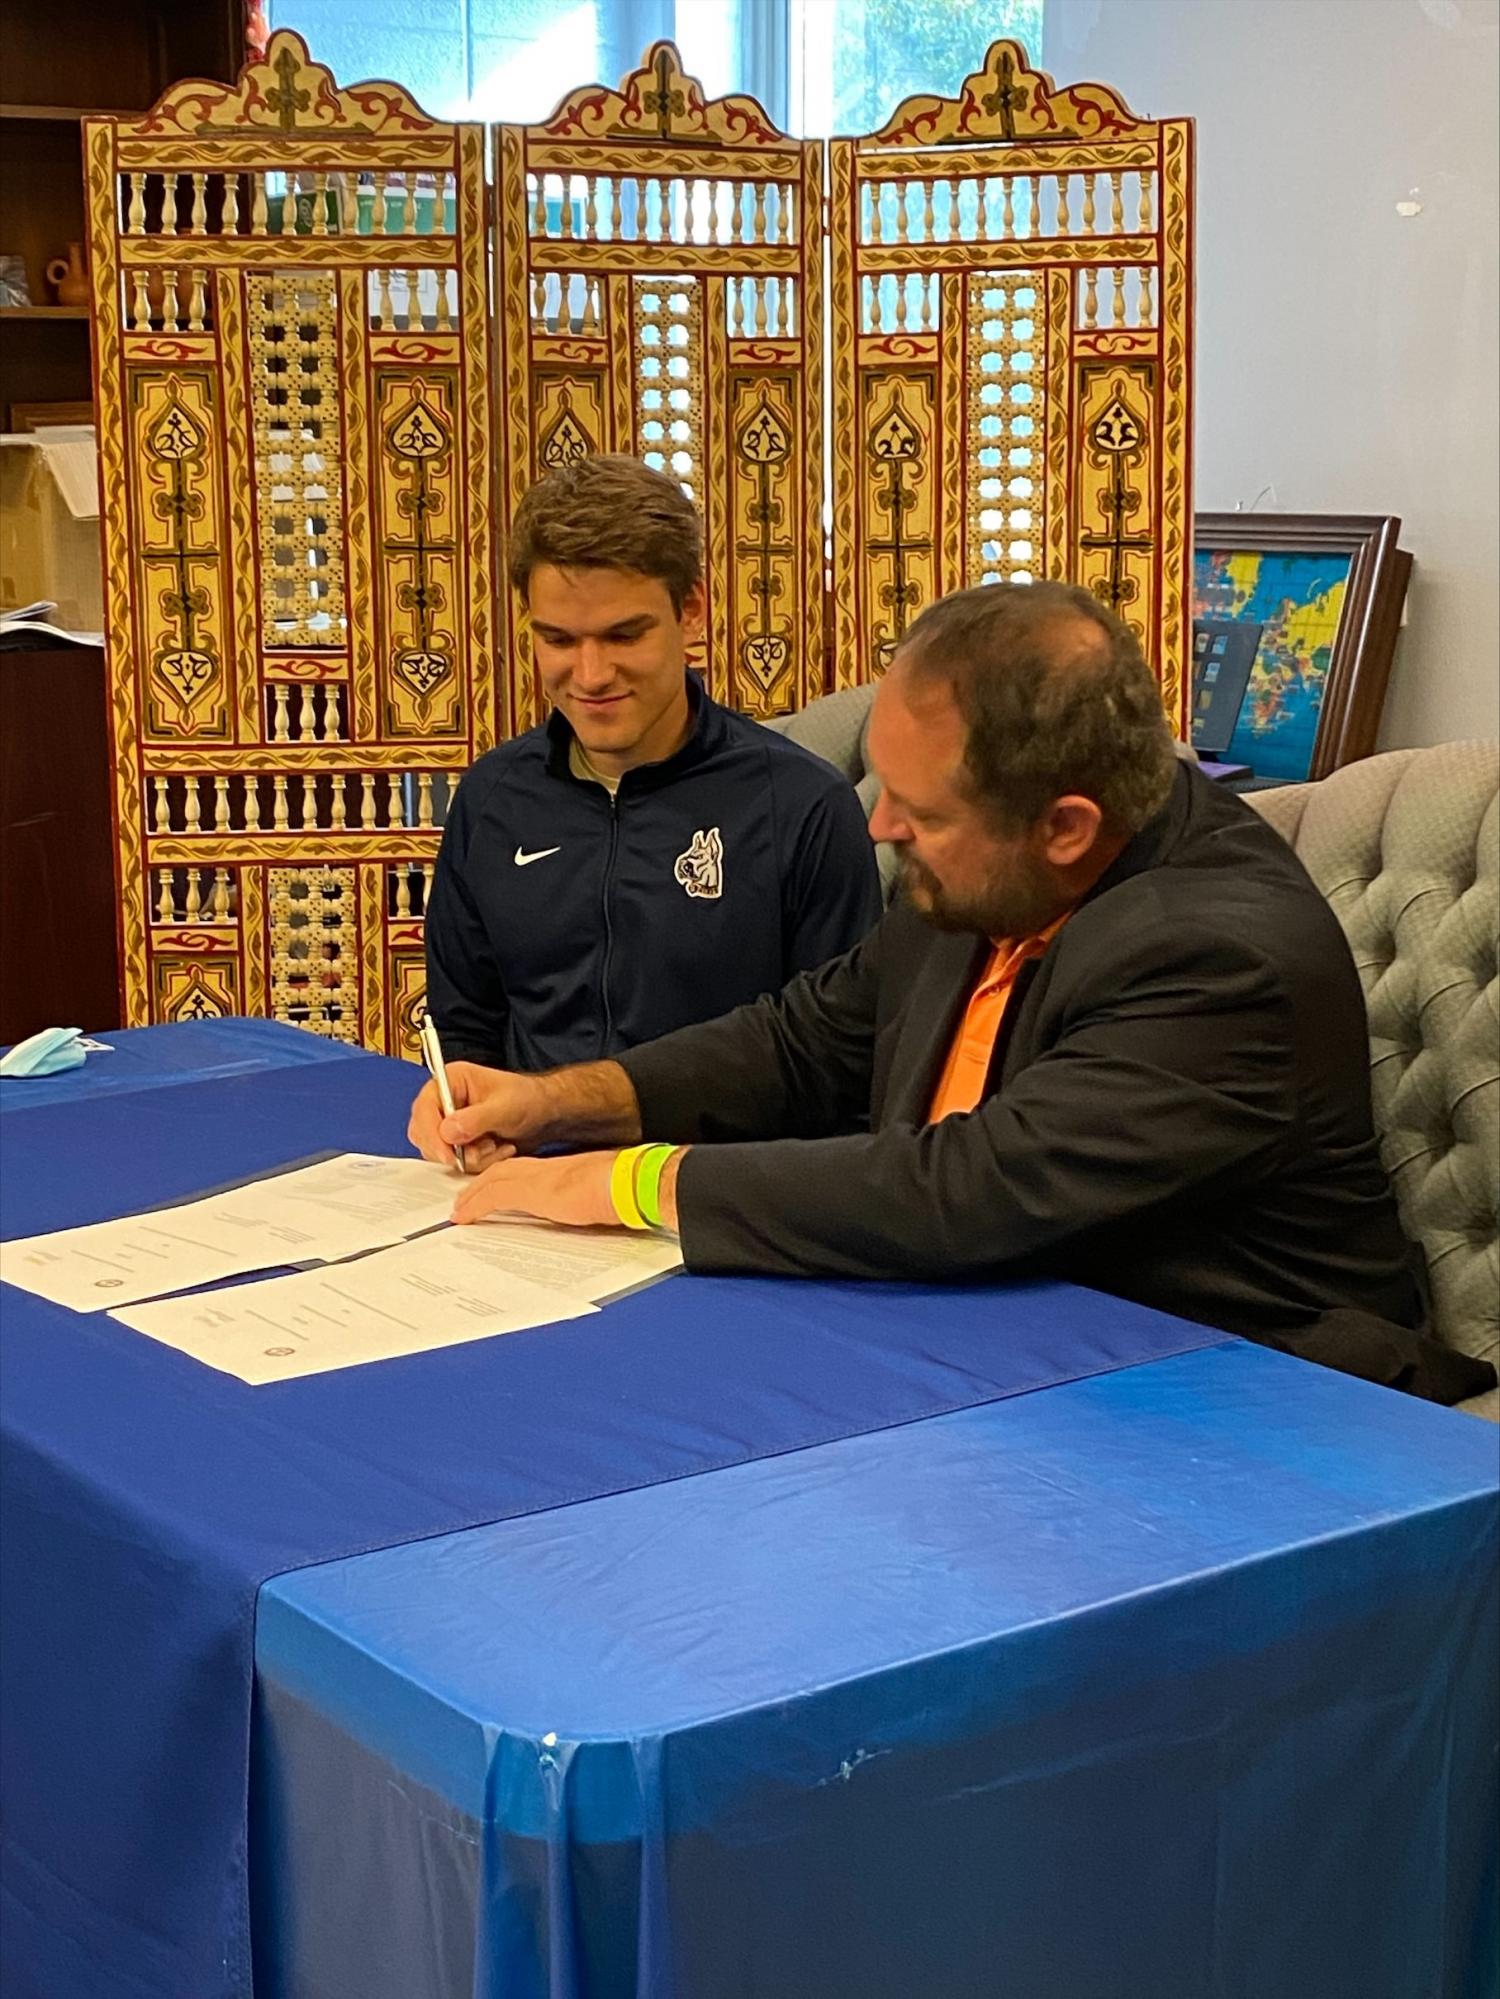 Bluefield State College student Theodor Schell (left) observes as Dr. Ted Lewis, BSC provost signs a Memorandum of Agreement with the University of Applied Sciences of Wurzburg-Scheinfurt FHWS), Germany.  The MOU promotes student and faculty exchanges, collaborative faculty research, and information exchanges between Bluefield State and FHWS.